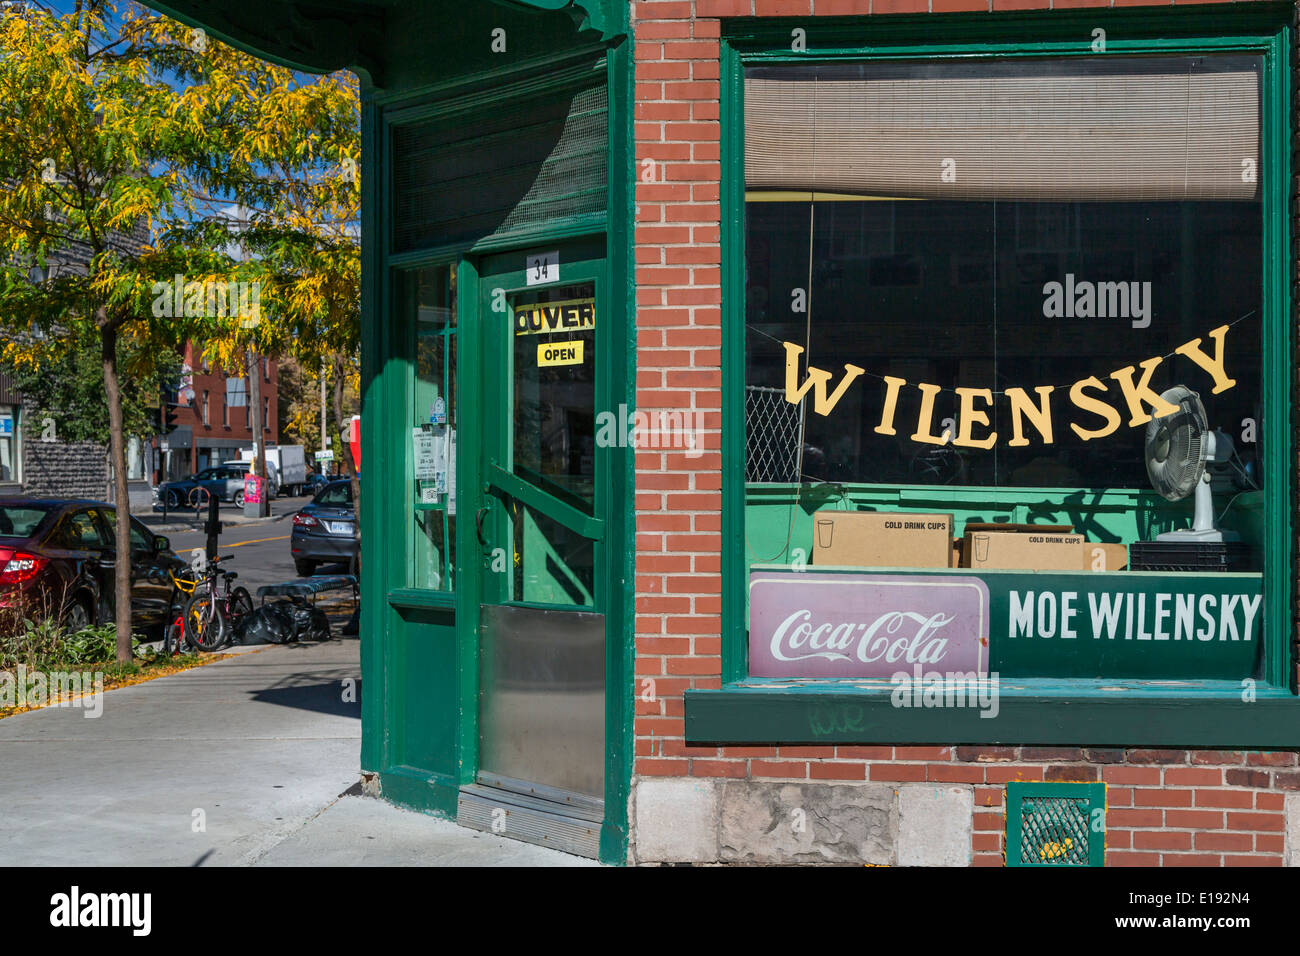 The famous light lunch shop and restaurant Wilensky's in Montreal, Quebec, Canada. Stock Photo